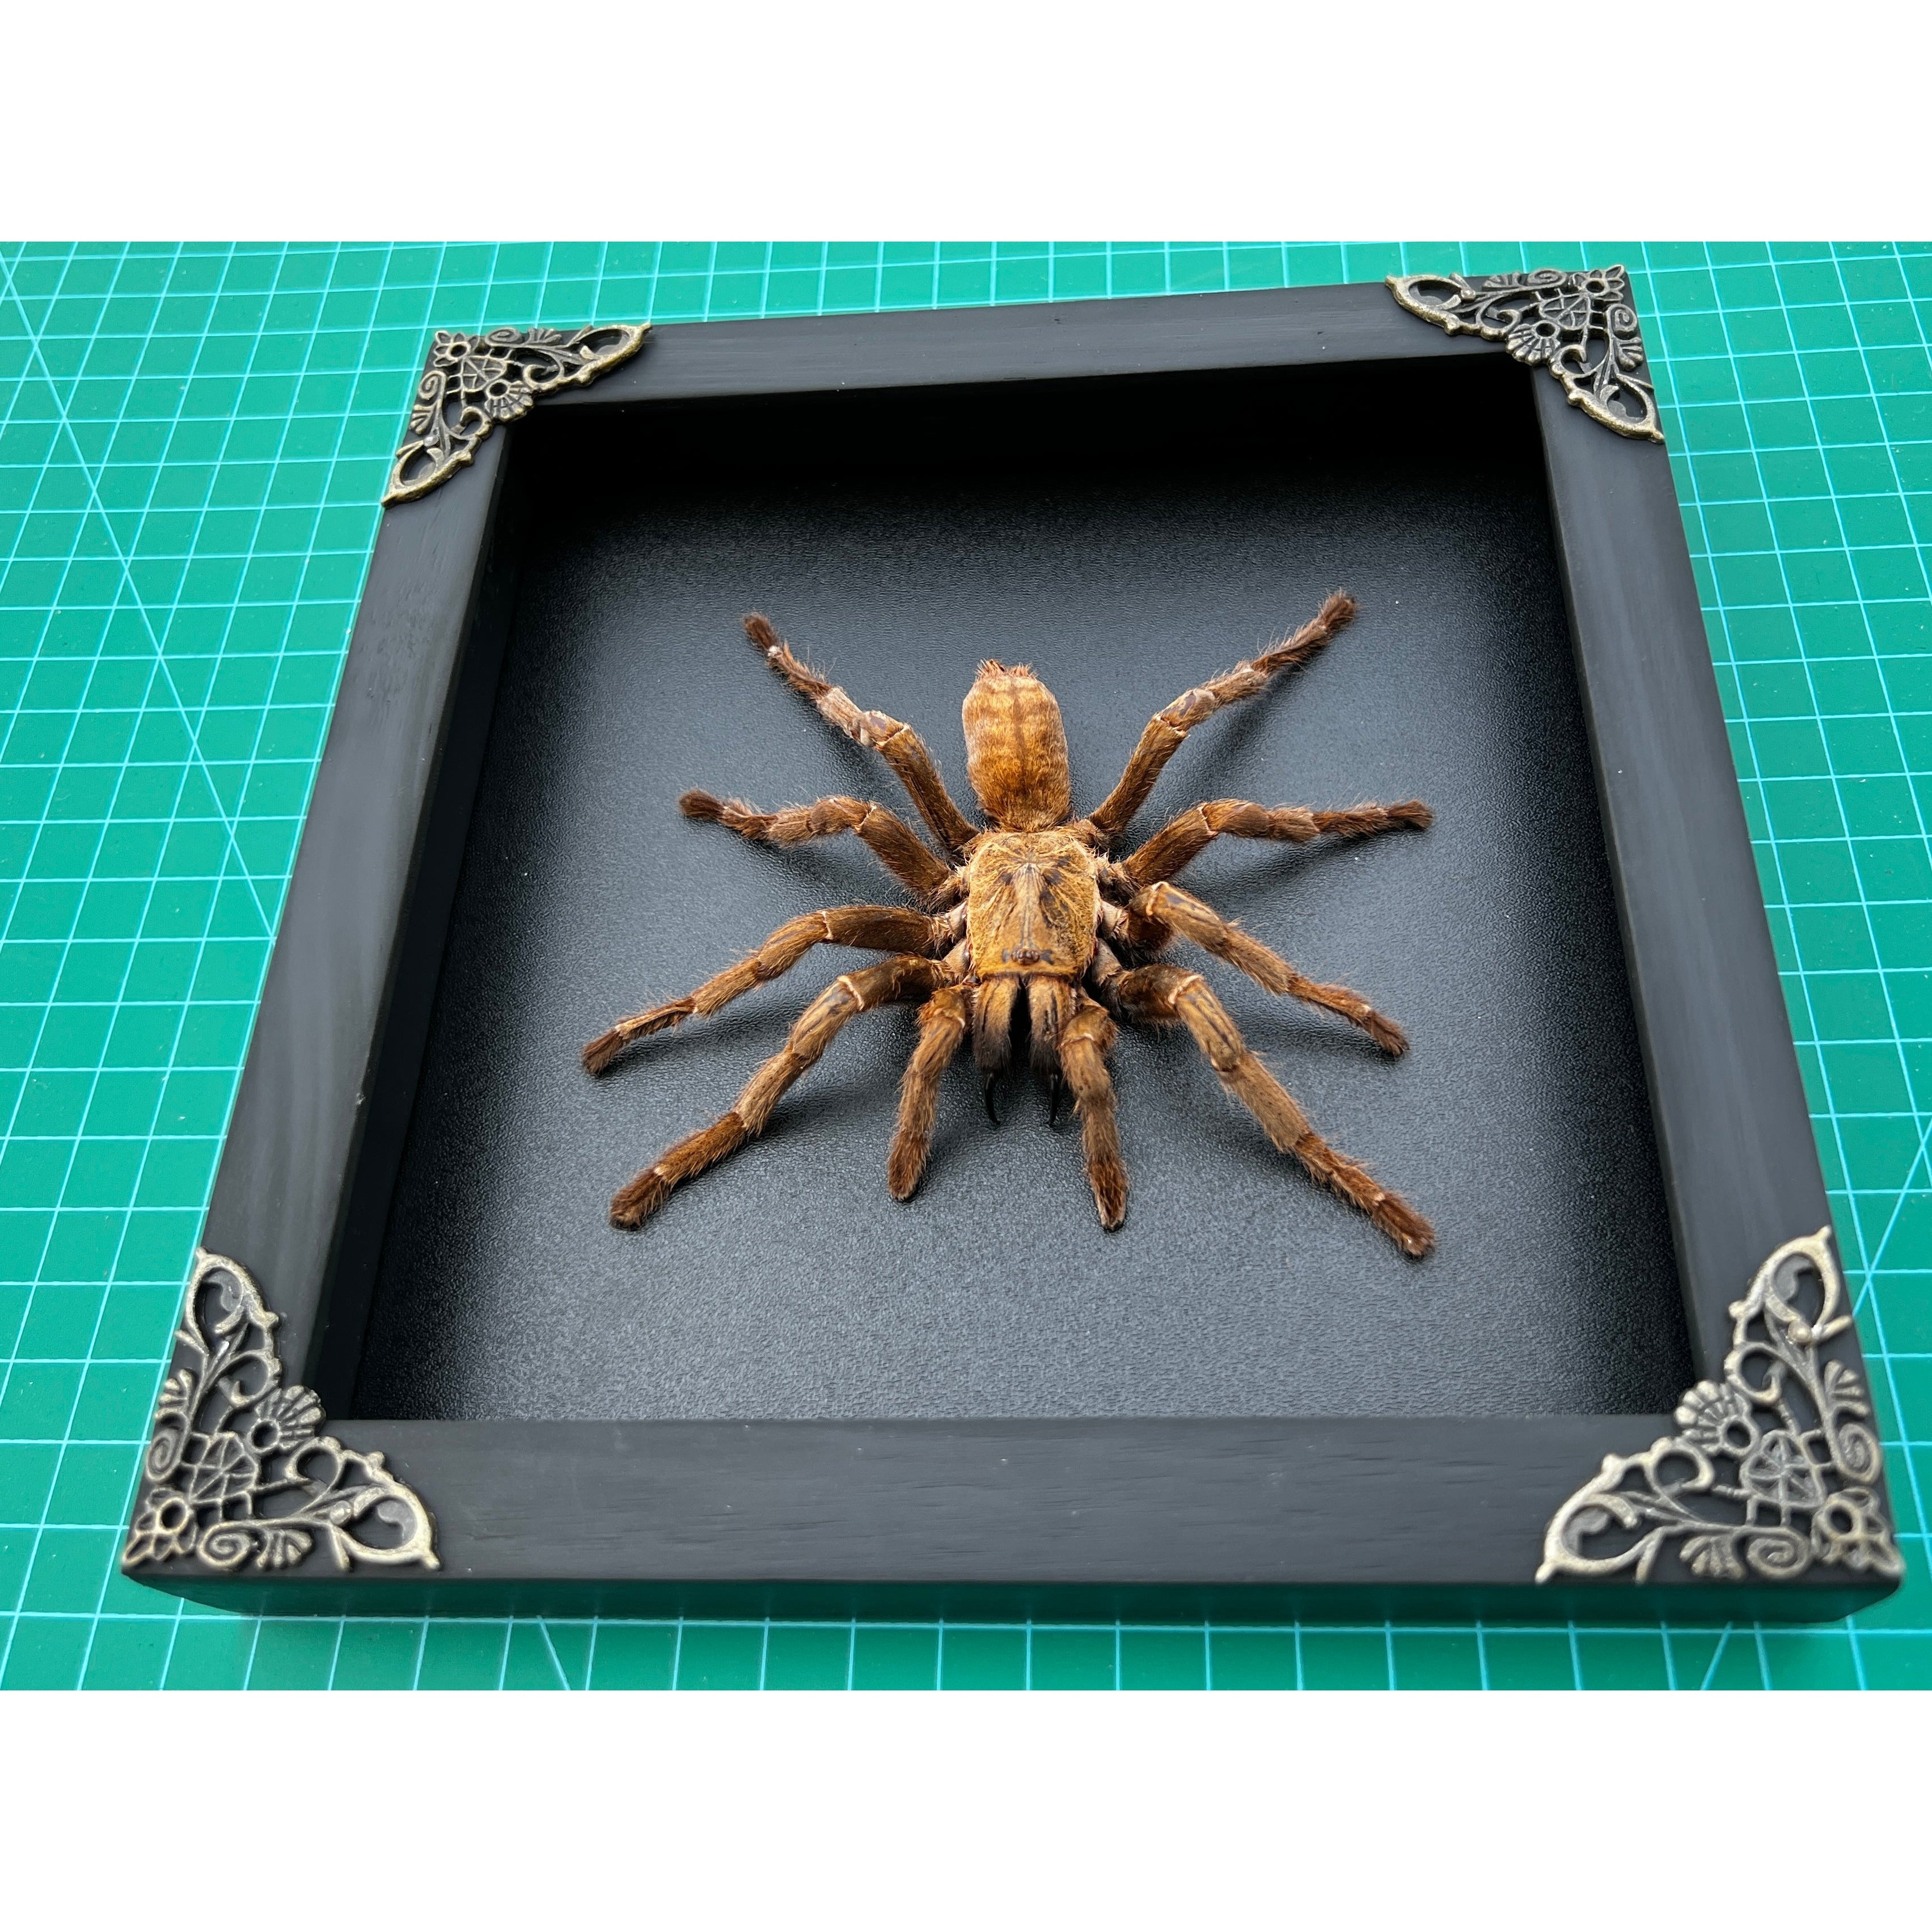 Real Framed Spider Shadow Box Bug Insect Unique Entomology Specimen Oddity Taxidermy Collection Tabletop Wall Art Home Decor Living Gallery K16-56-DE - Vinacreations